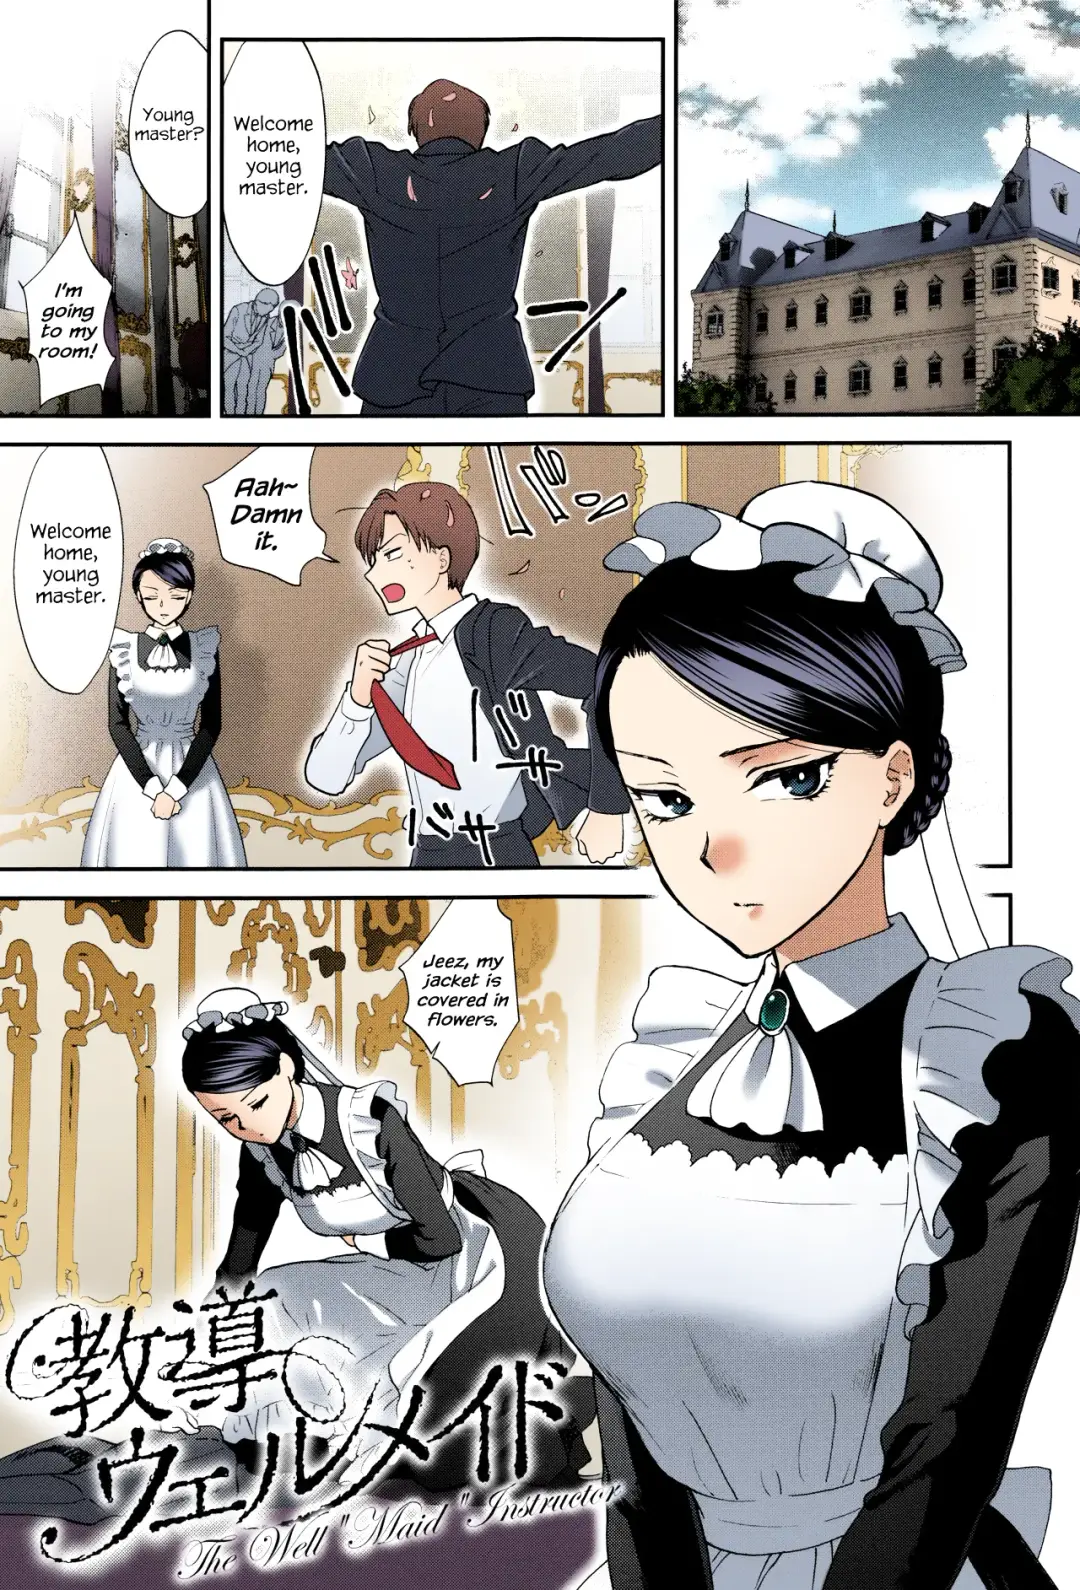 Read [Syoukaki] Kyoudou Well Maid - The Well "Maid" Instructor - Fhentai.net